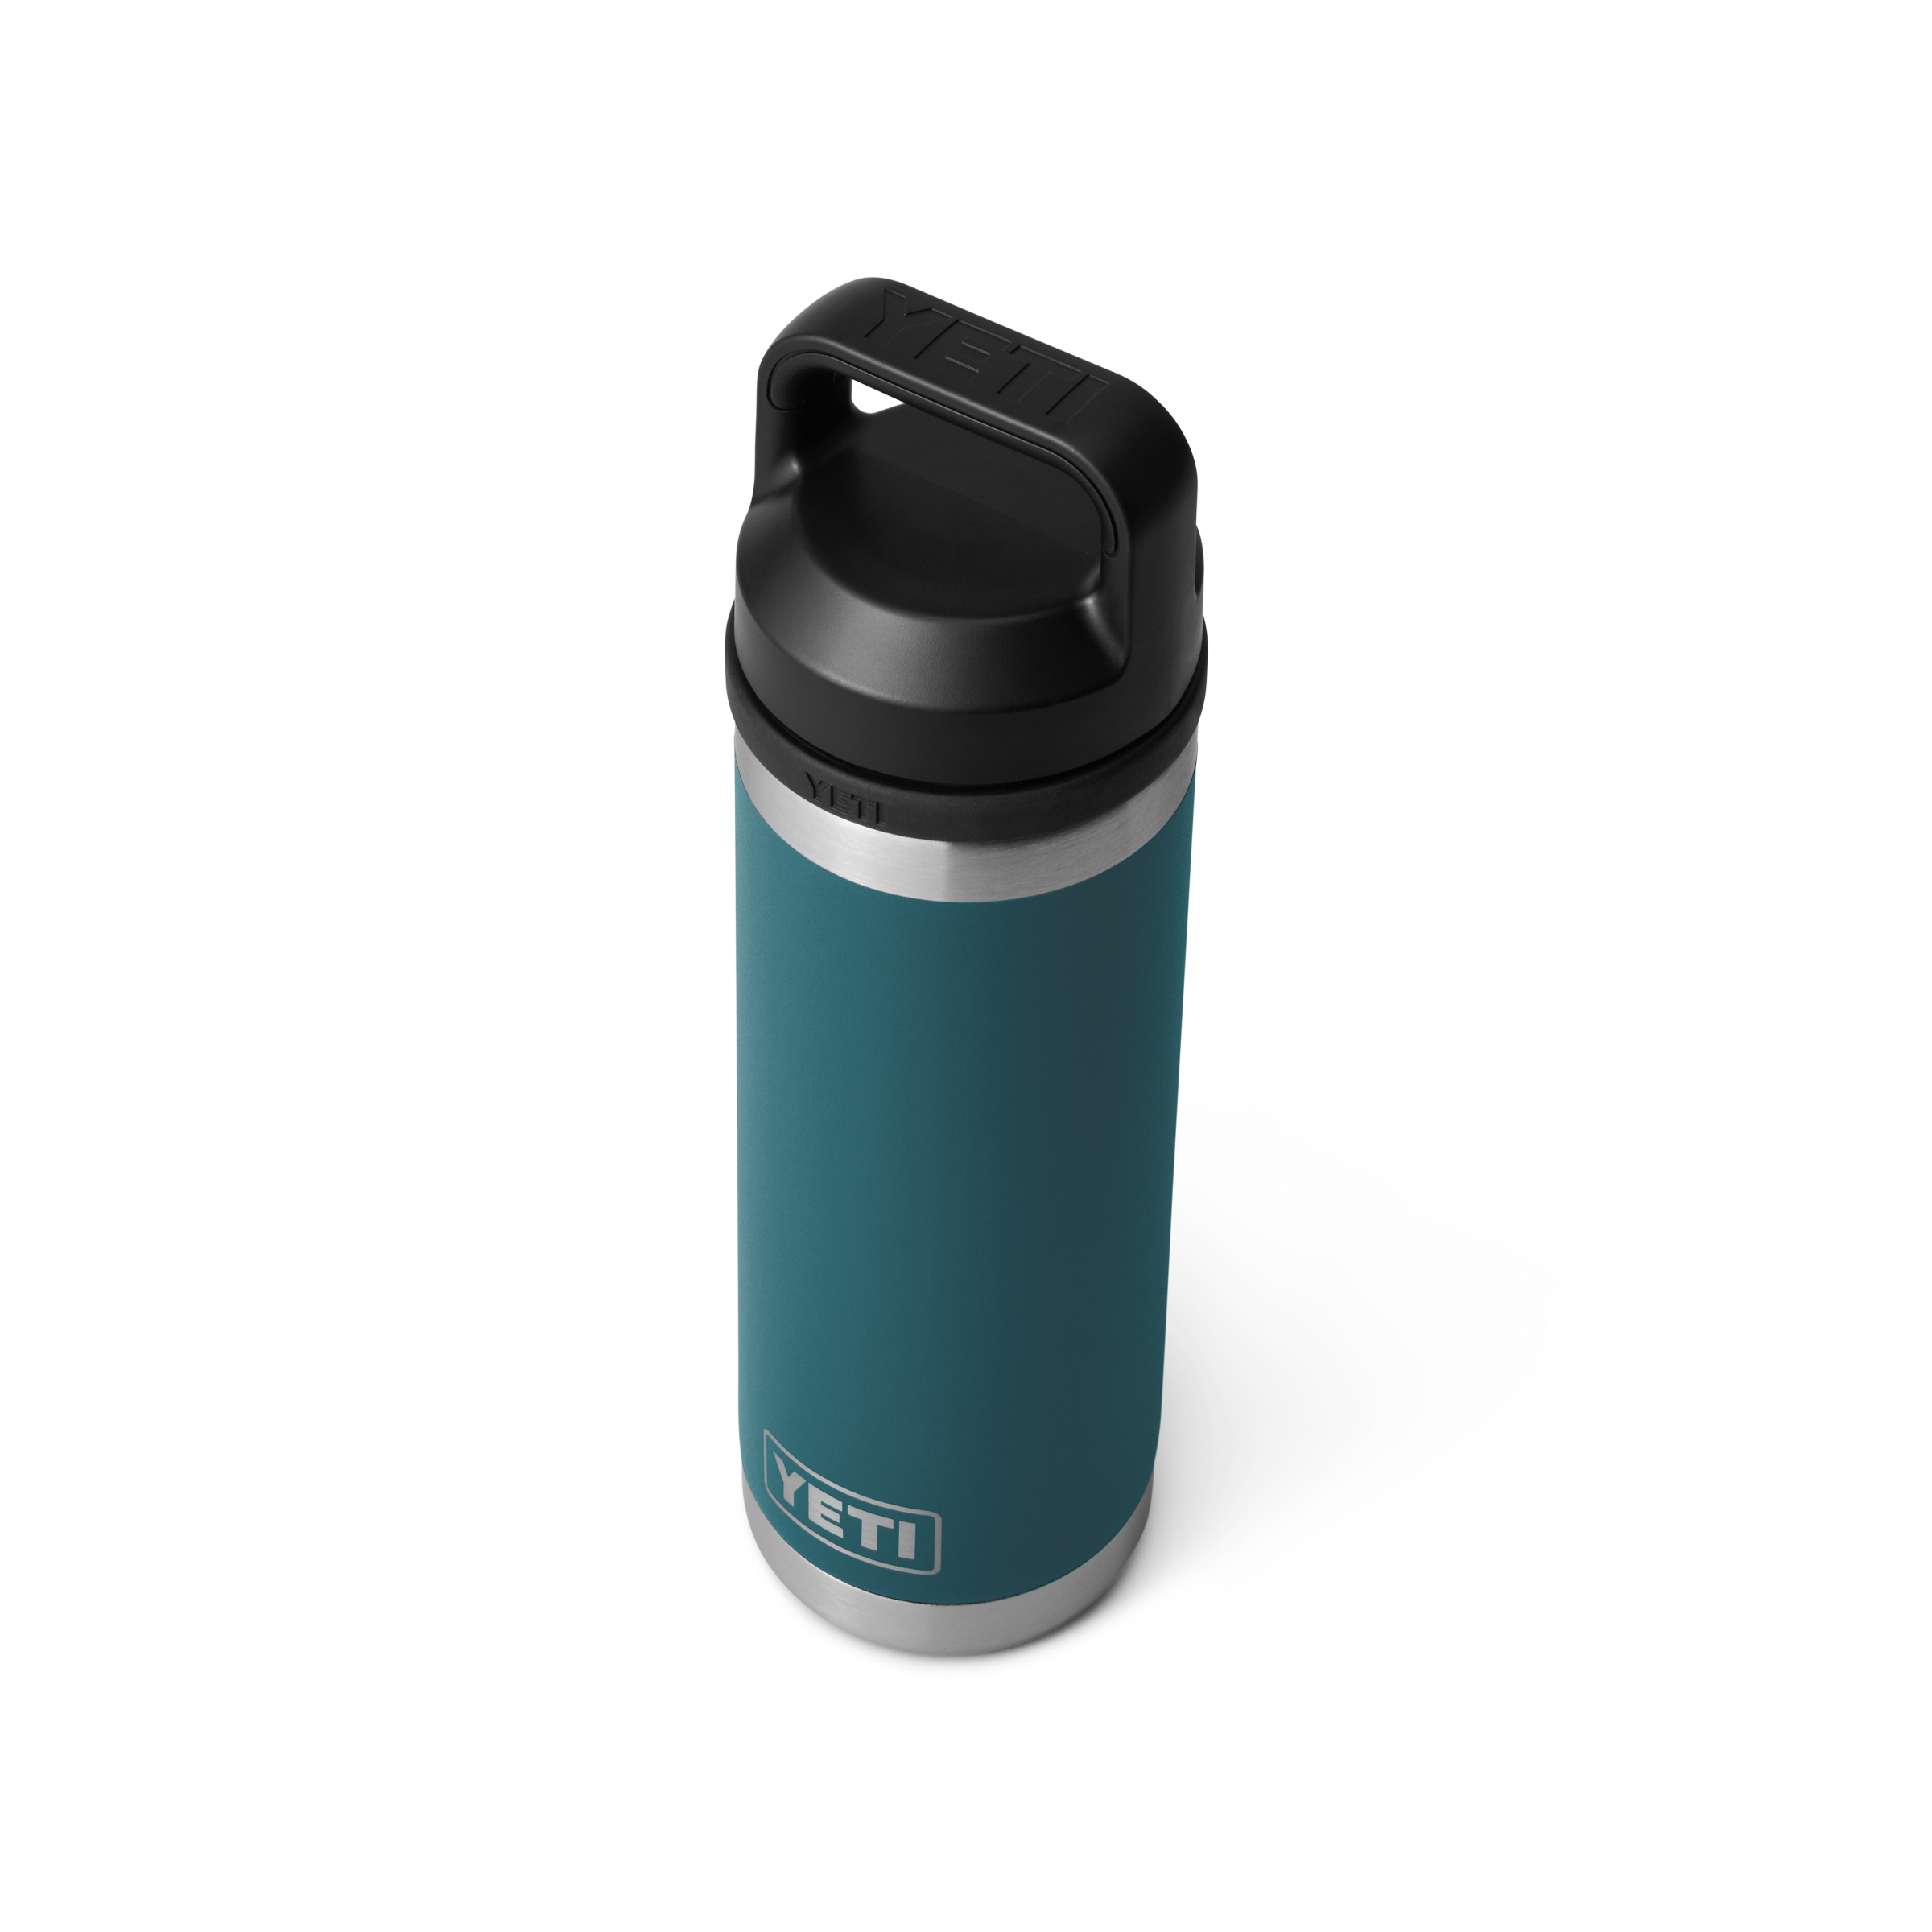 RAMBLER BOTTLE 18 OZ C (532ML) YETI AGAVE TEAL STAINLESS STEEL INSULATED BLUE DRINK BOTTLE DRINK WEAR CHUG CAP HANDLE SILVER YETI ENGRAVING HOT OR COLD